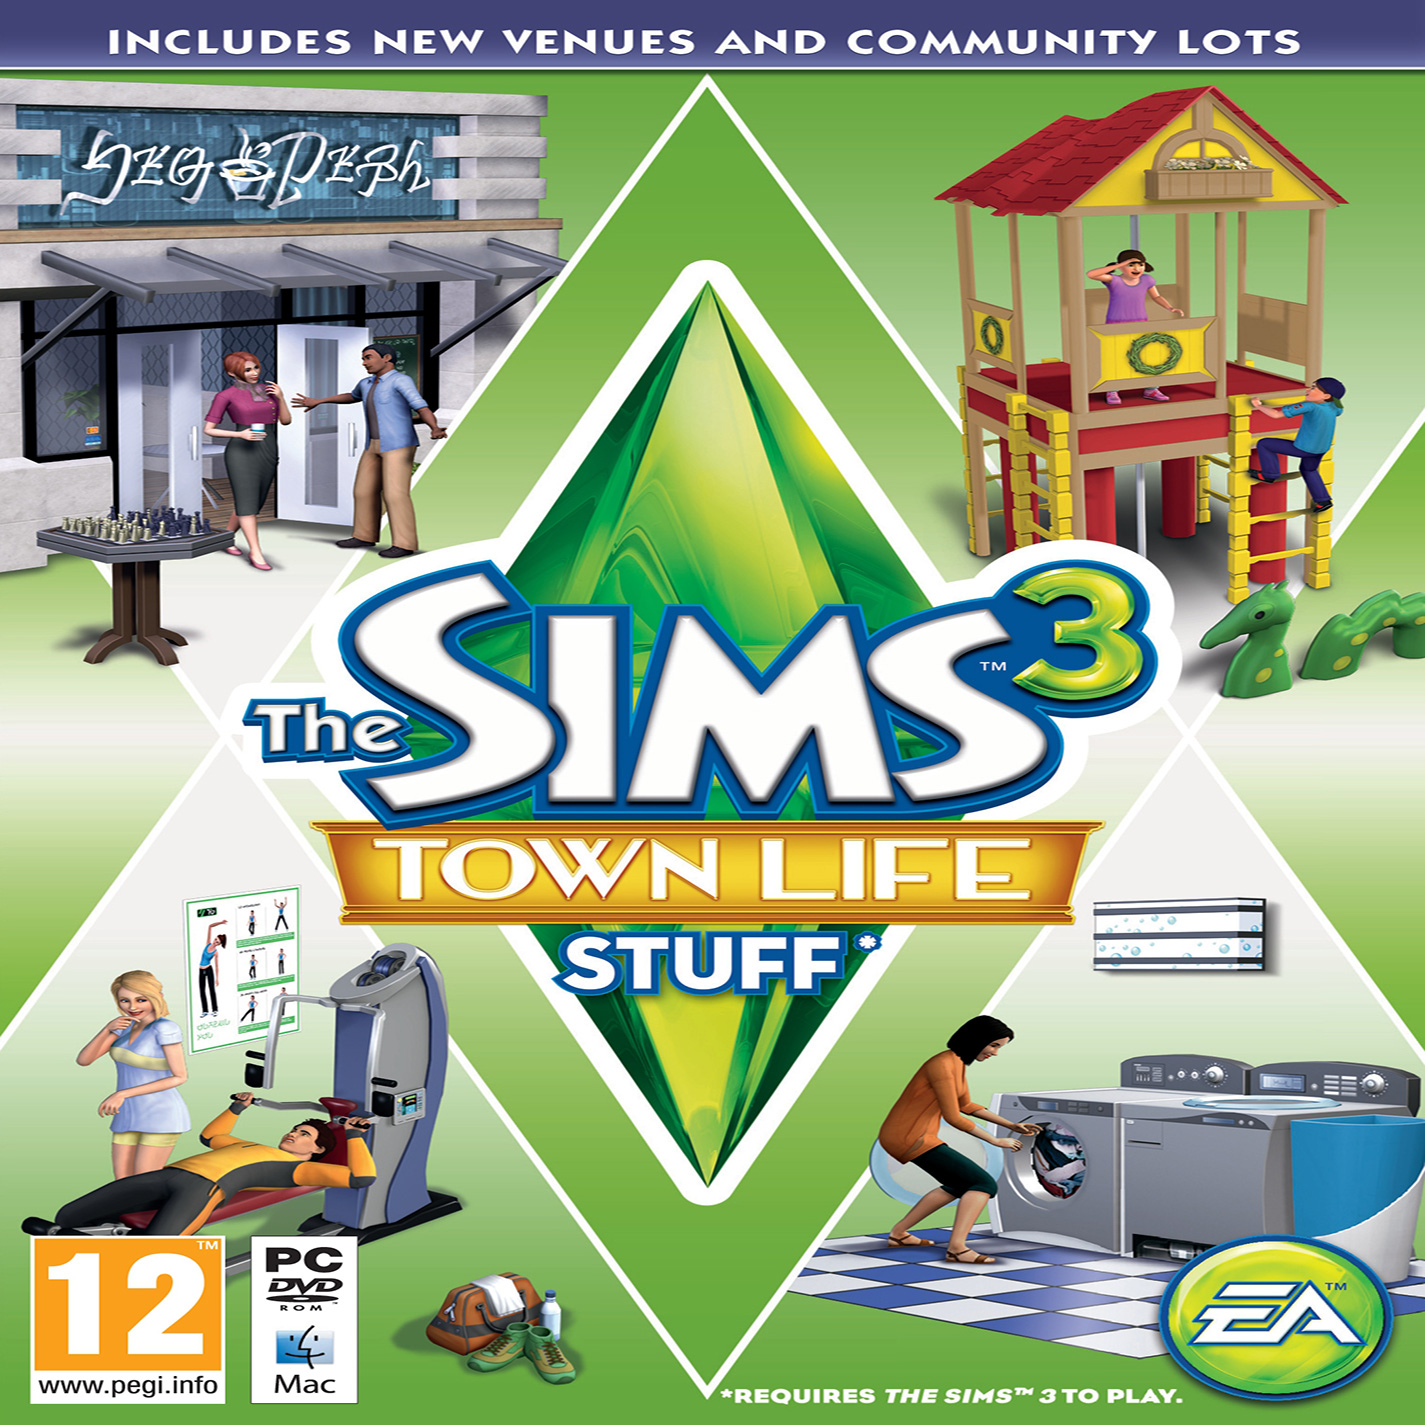 The Sims 3: Town Life Stuff - pedn CD obal 2